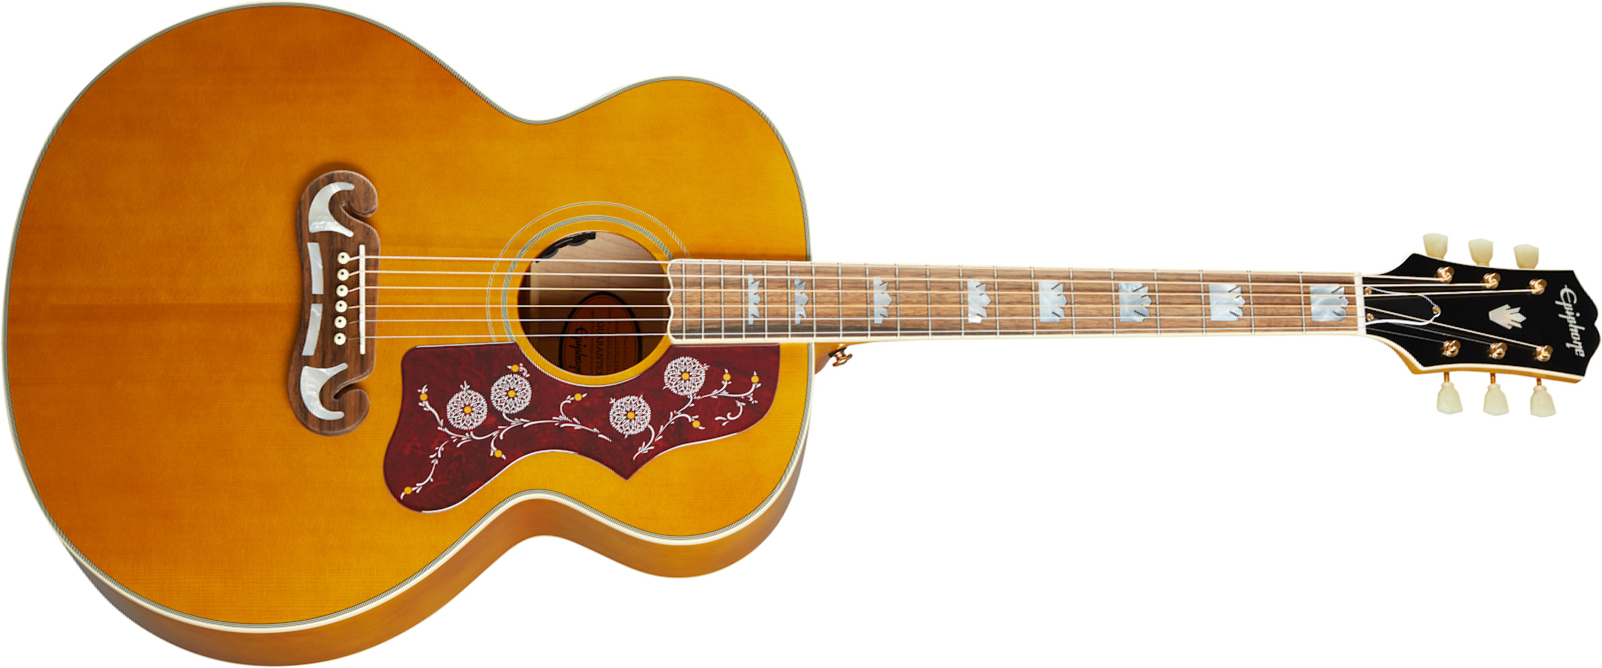 Epiphone J-200 Inspired By Gibson Jumbo Epicea Erable Lau - Aged Antique Natural - Electro acoustic guitar - Main picture